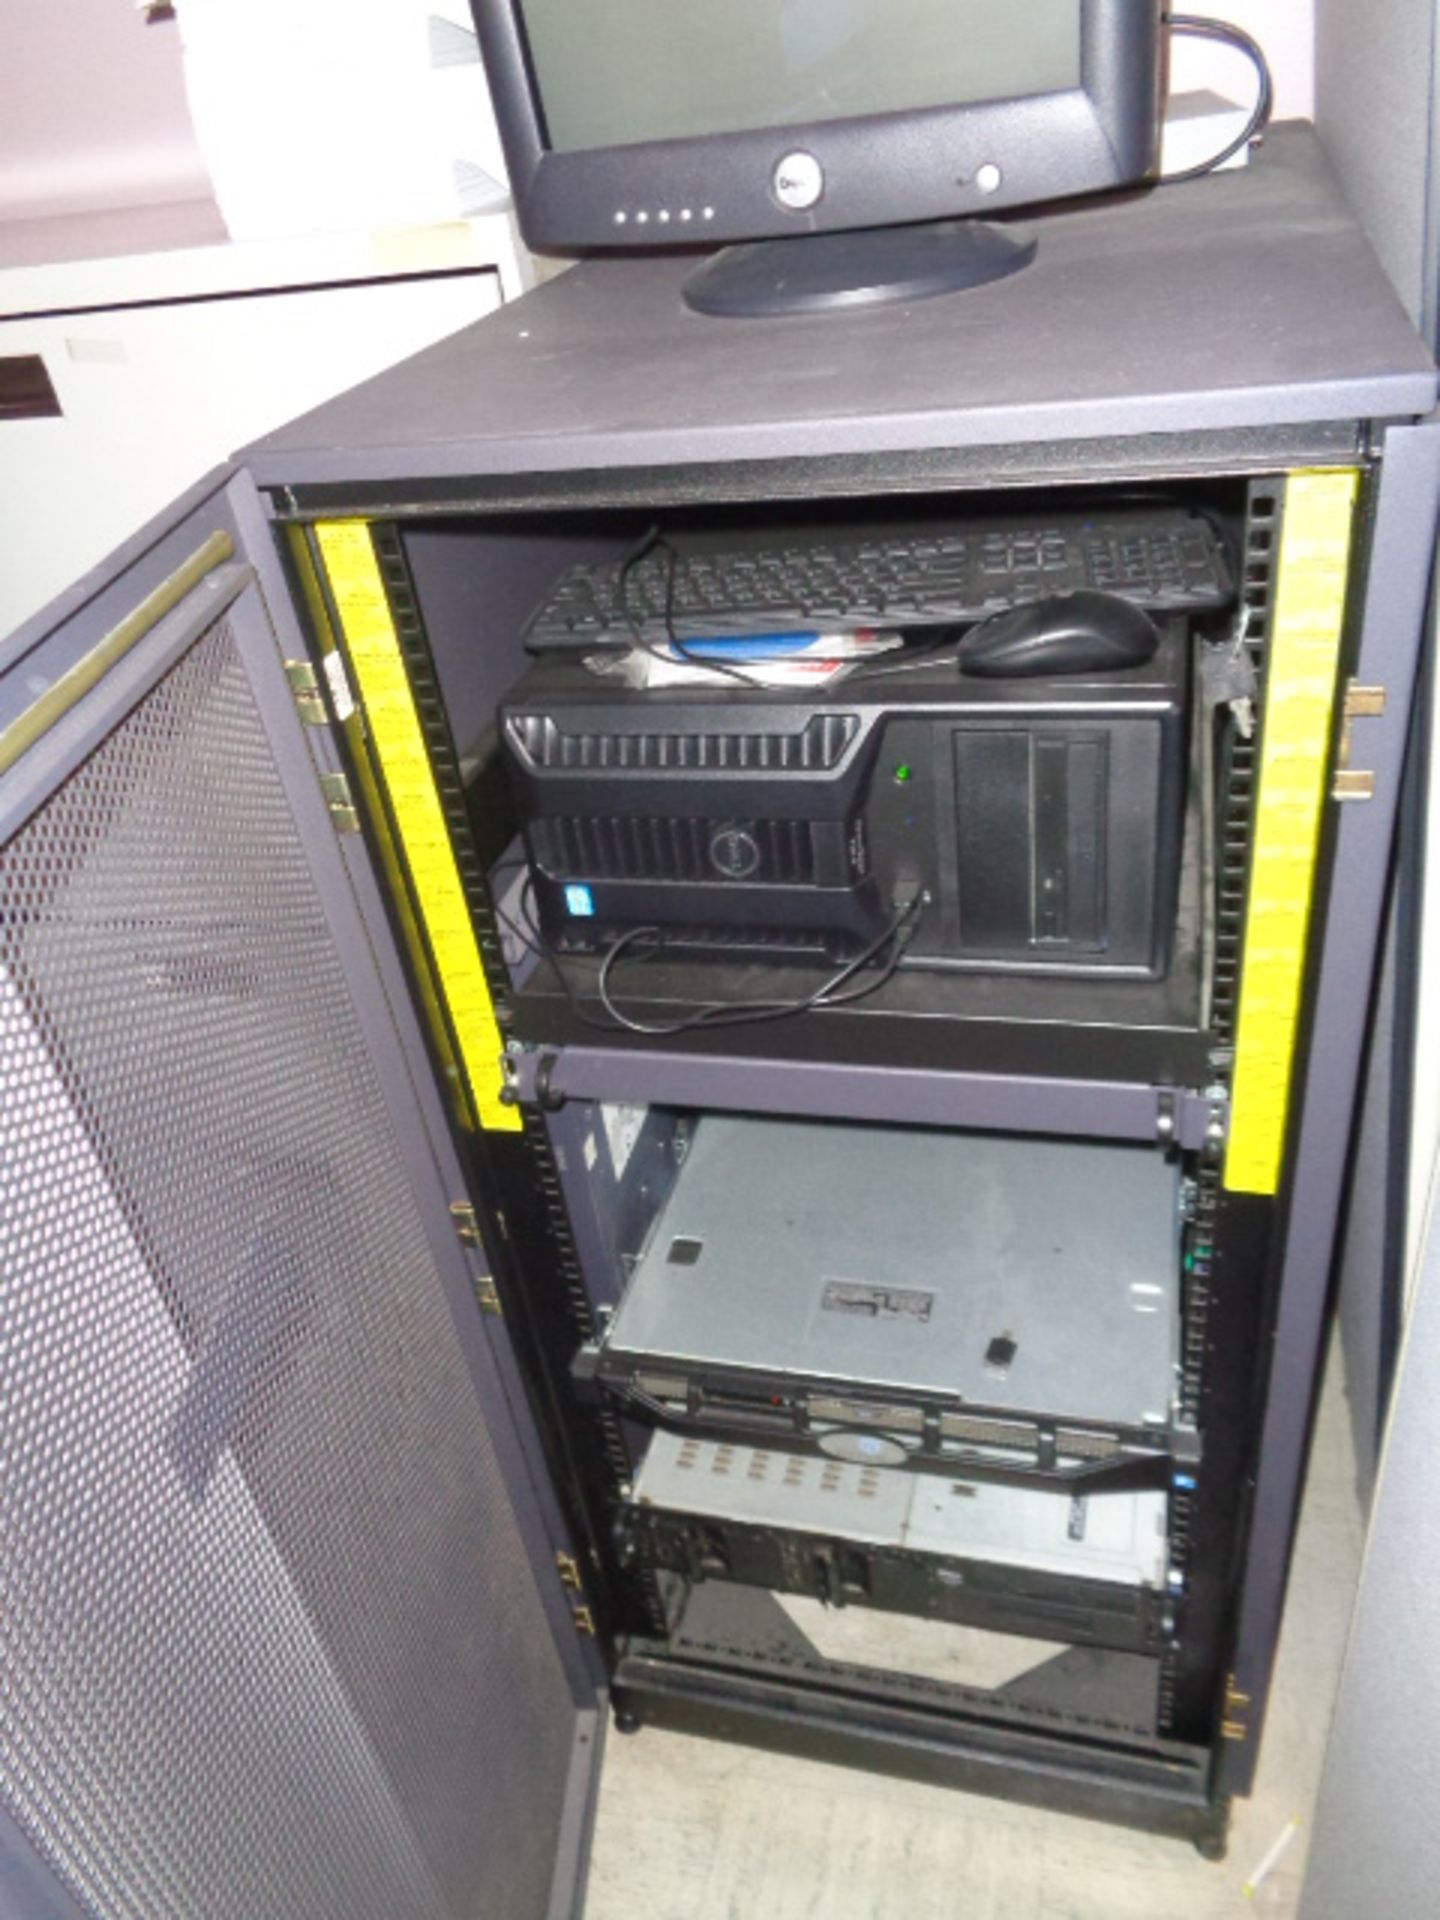 Dell File Server System with Locking Cabinet includes Wall Cabinet with Routers and Modems